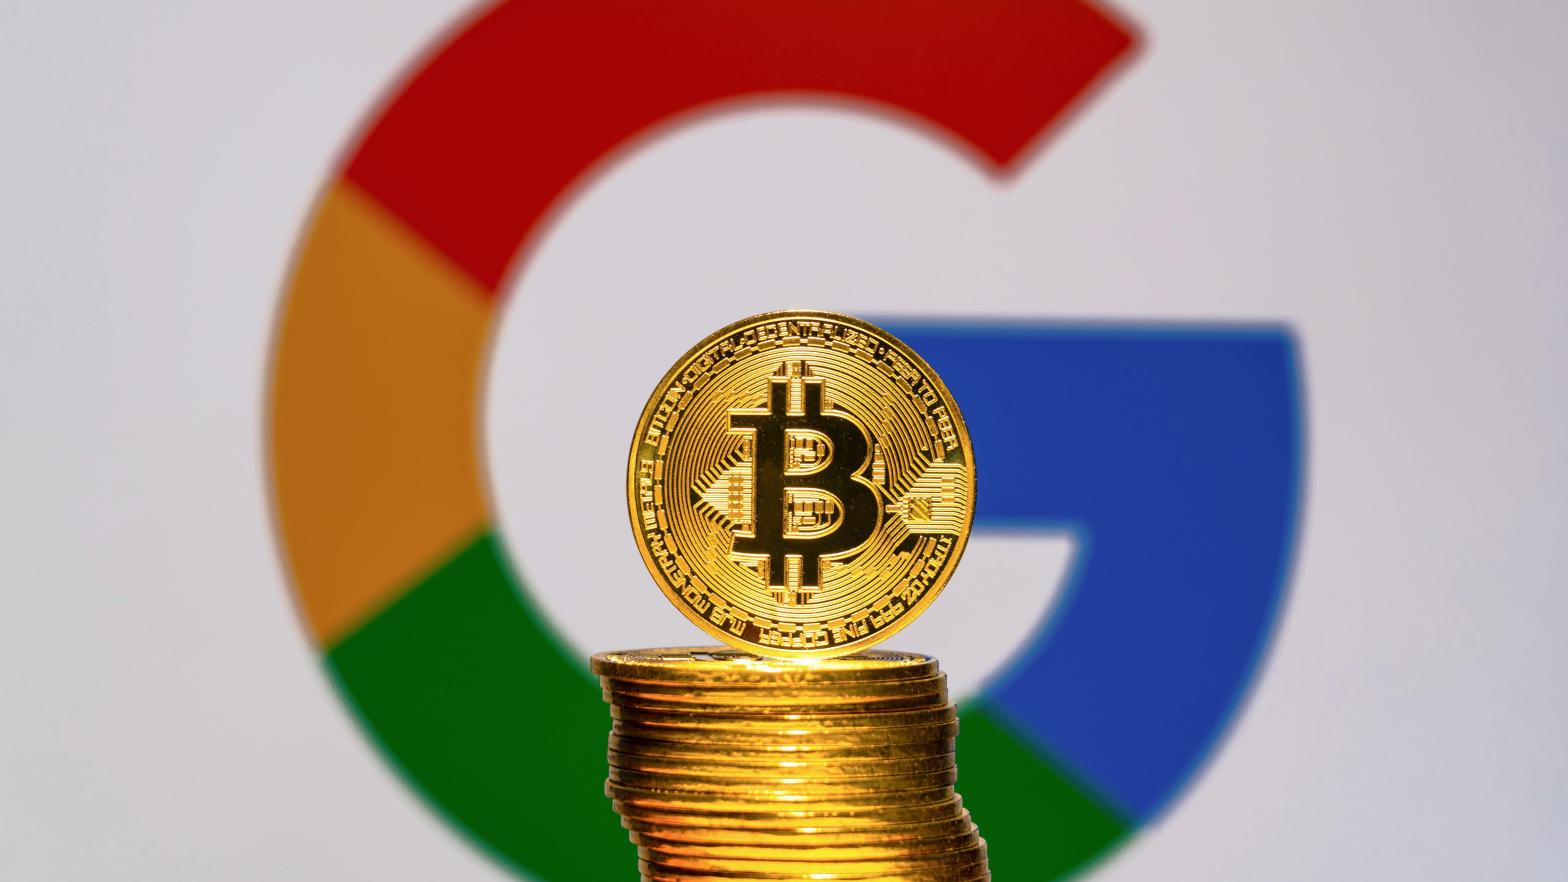 Google has overall invested well over a billion in blockchain and crypto companies over the past year or so. (Photo: Shutterstock, Shutterstock)